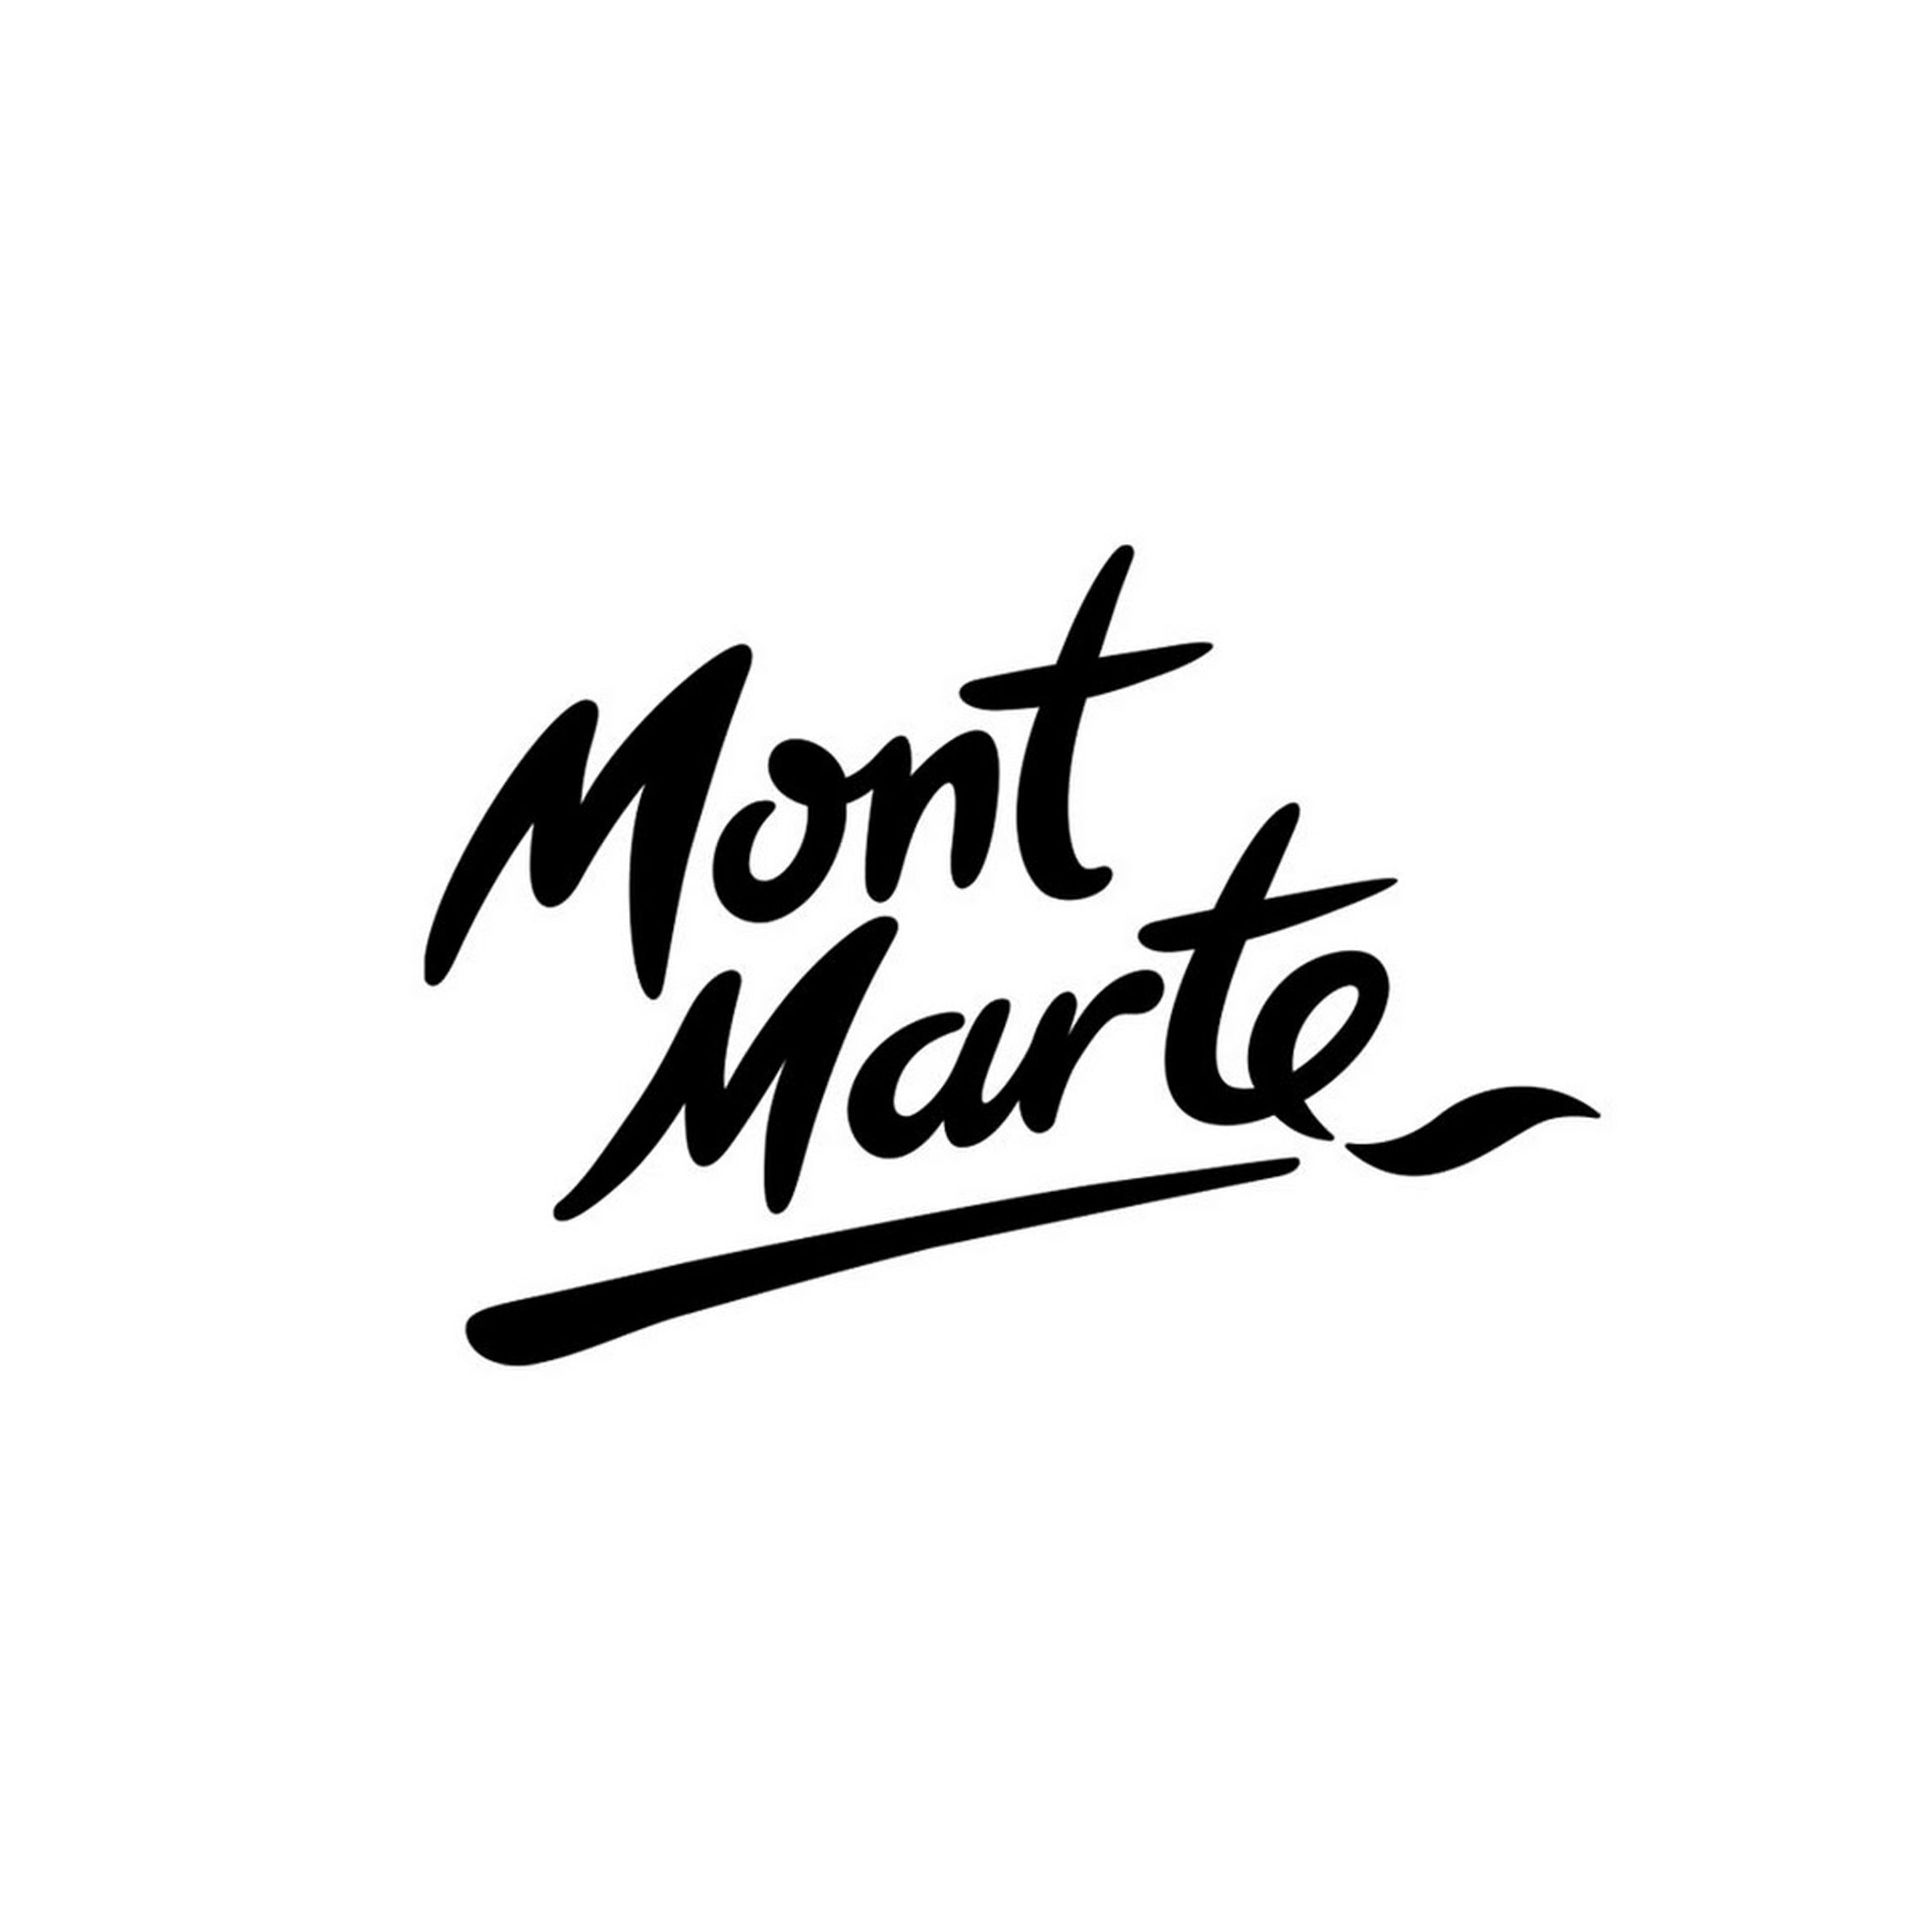 Product Brand: Mont Marte